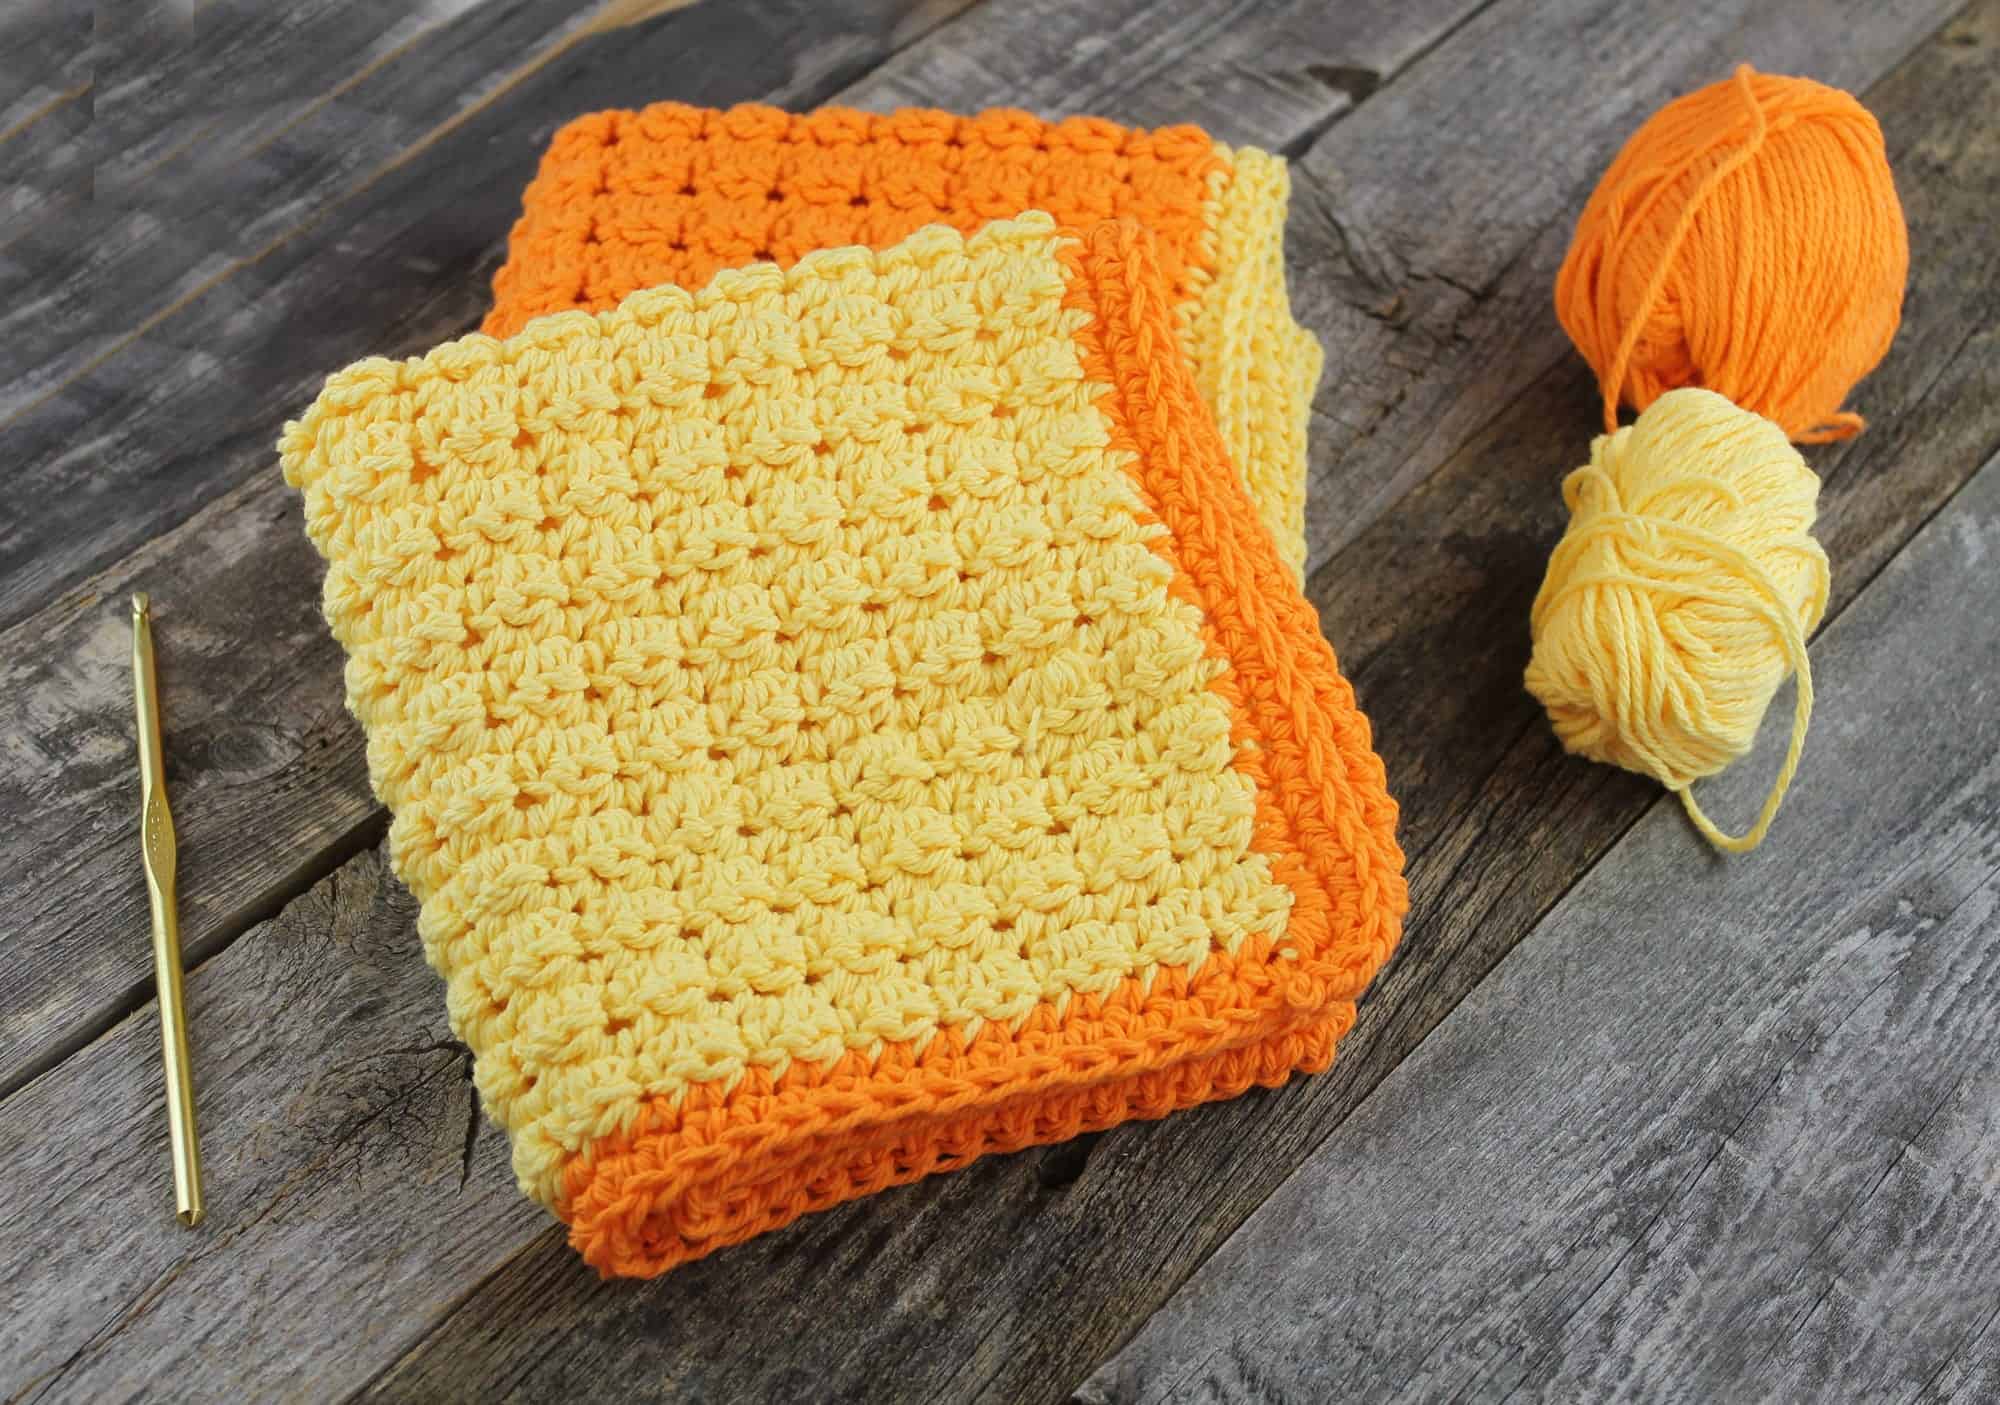 Even Berry Free Dishcloth Crochet Pattern – How to - A More Crafty